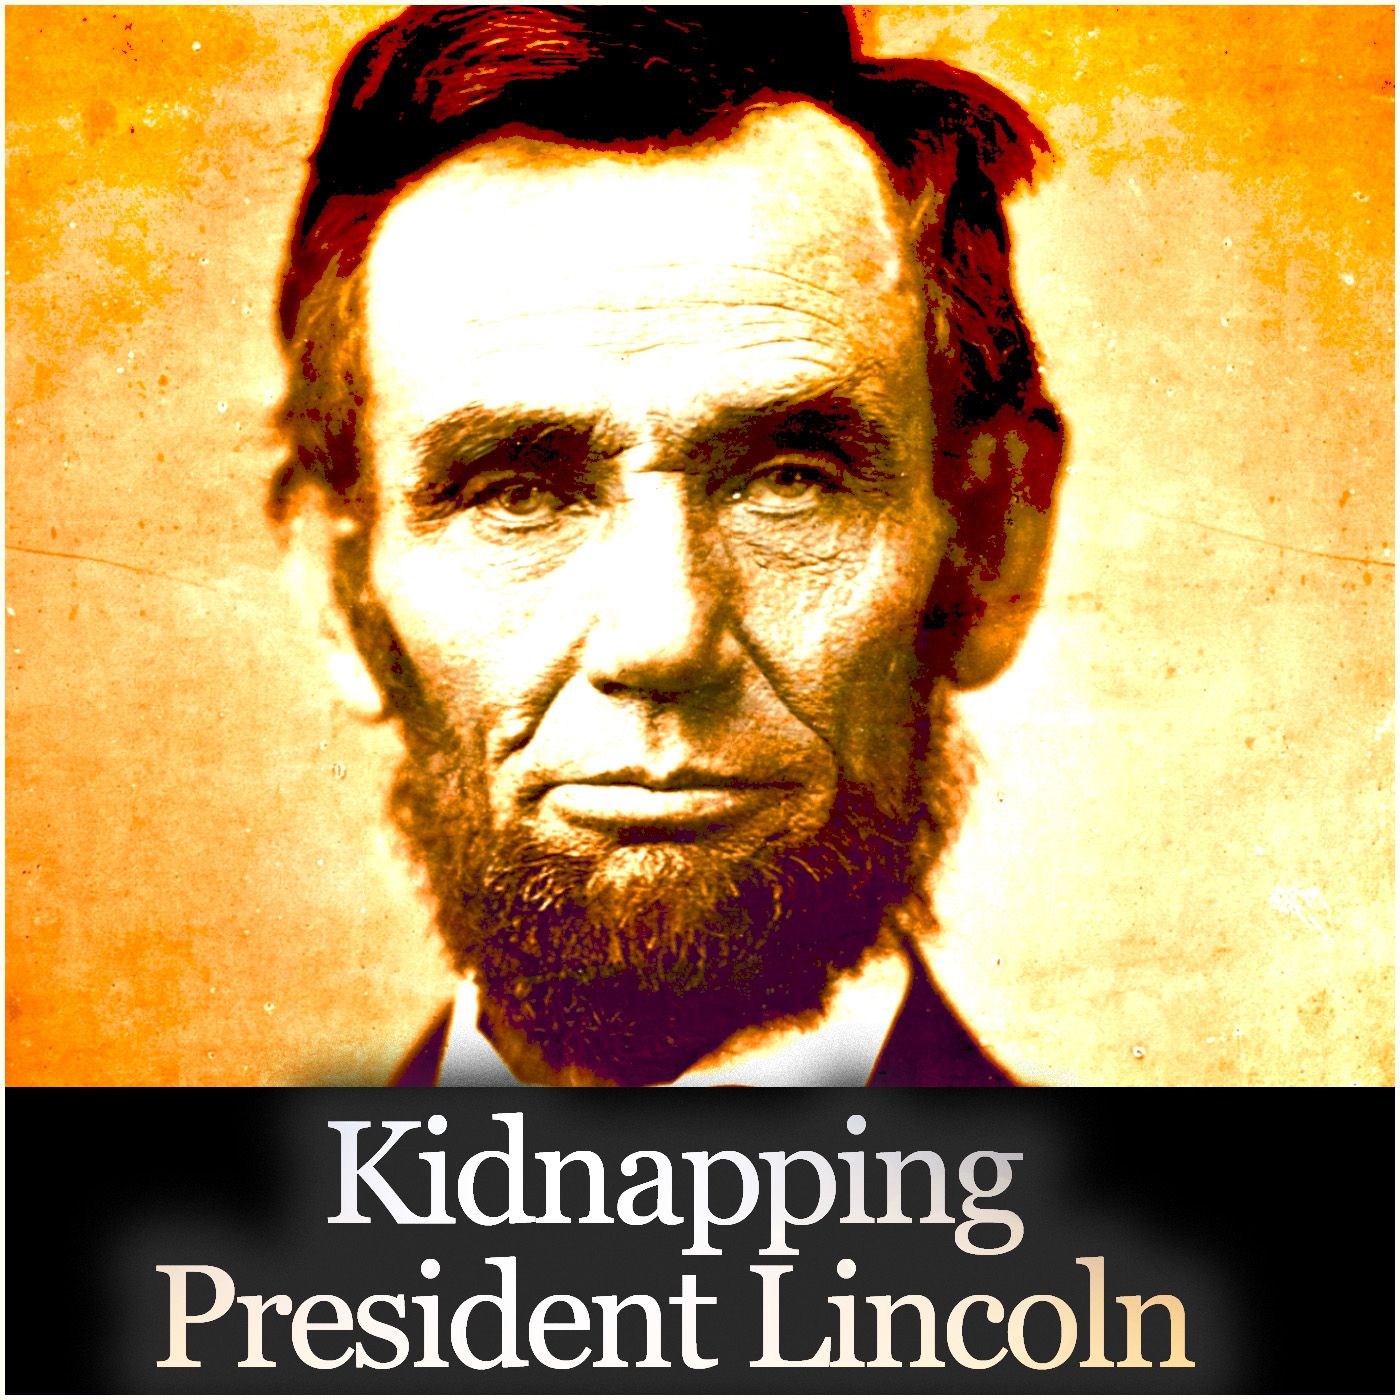 Kidnapping President Lincoln